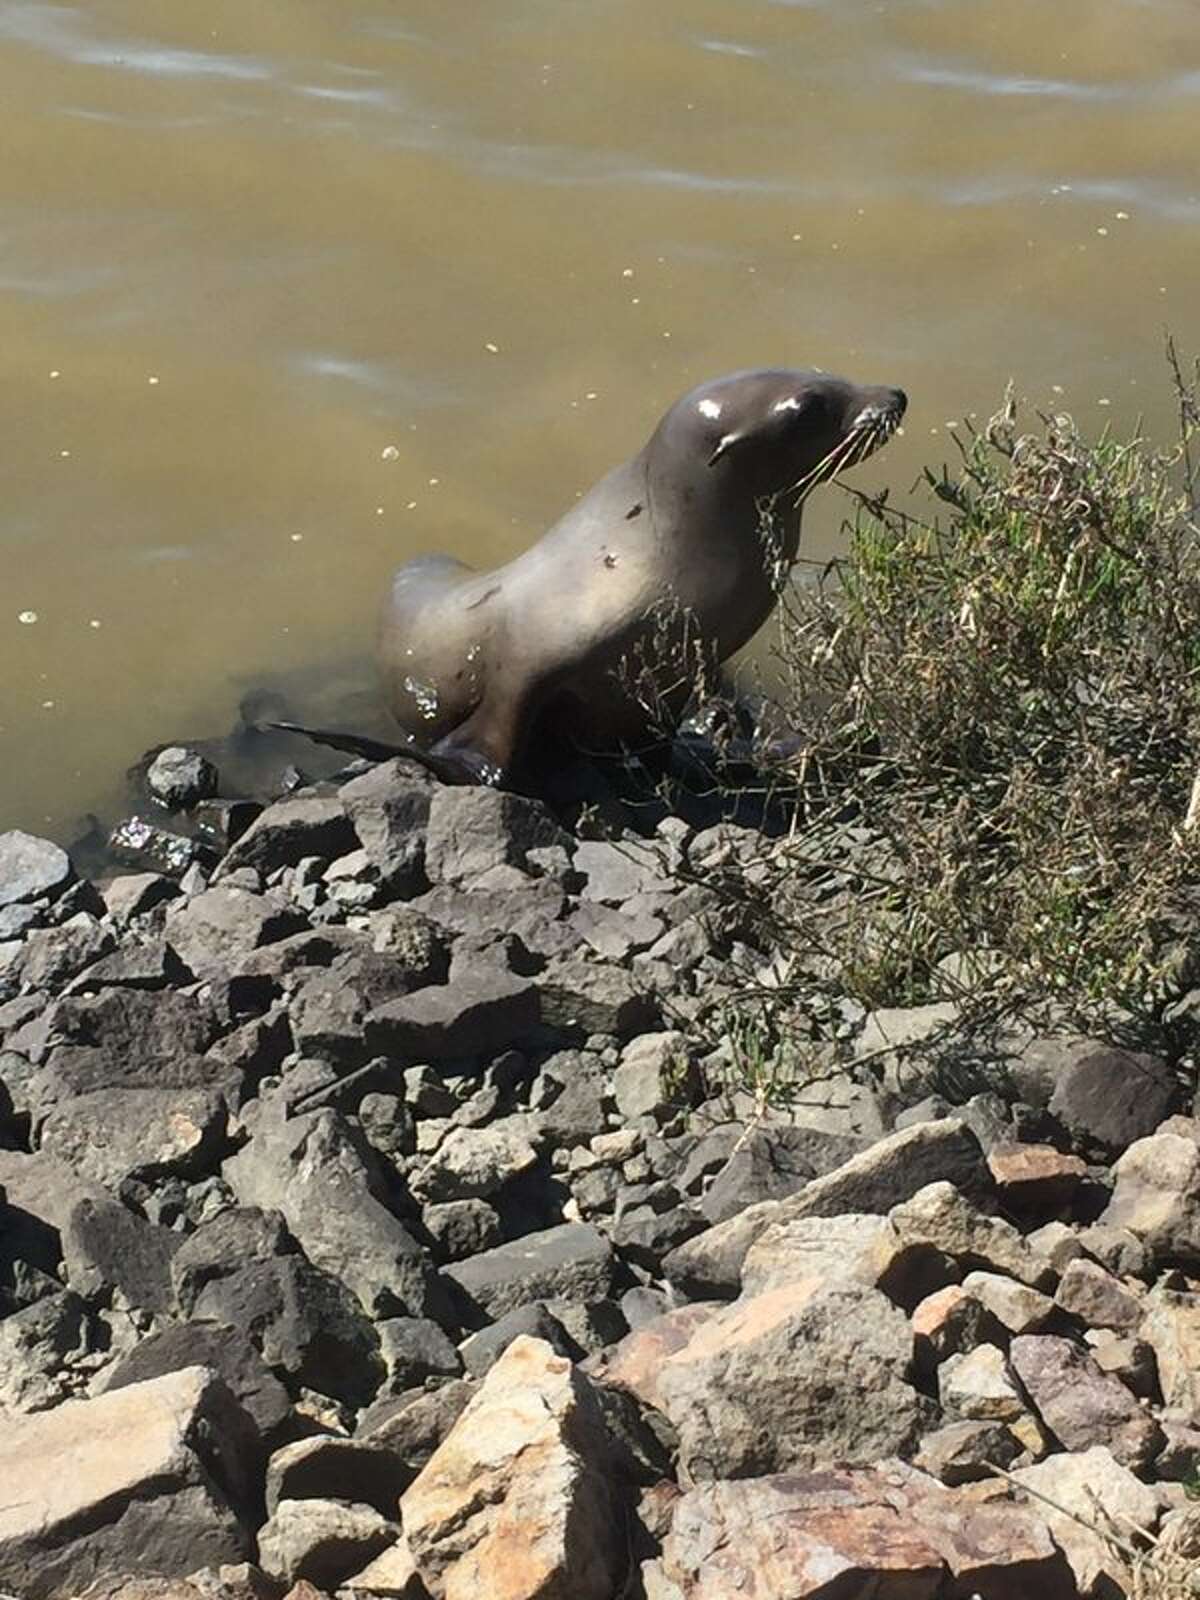 School Daze, the sea lion, wandered onto Highway 37 in Sonoma County on Monday morning.